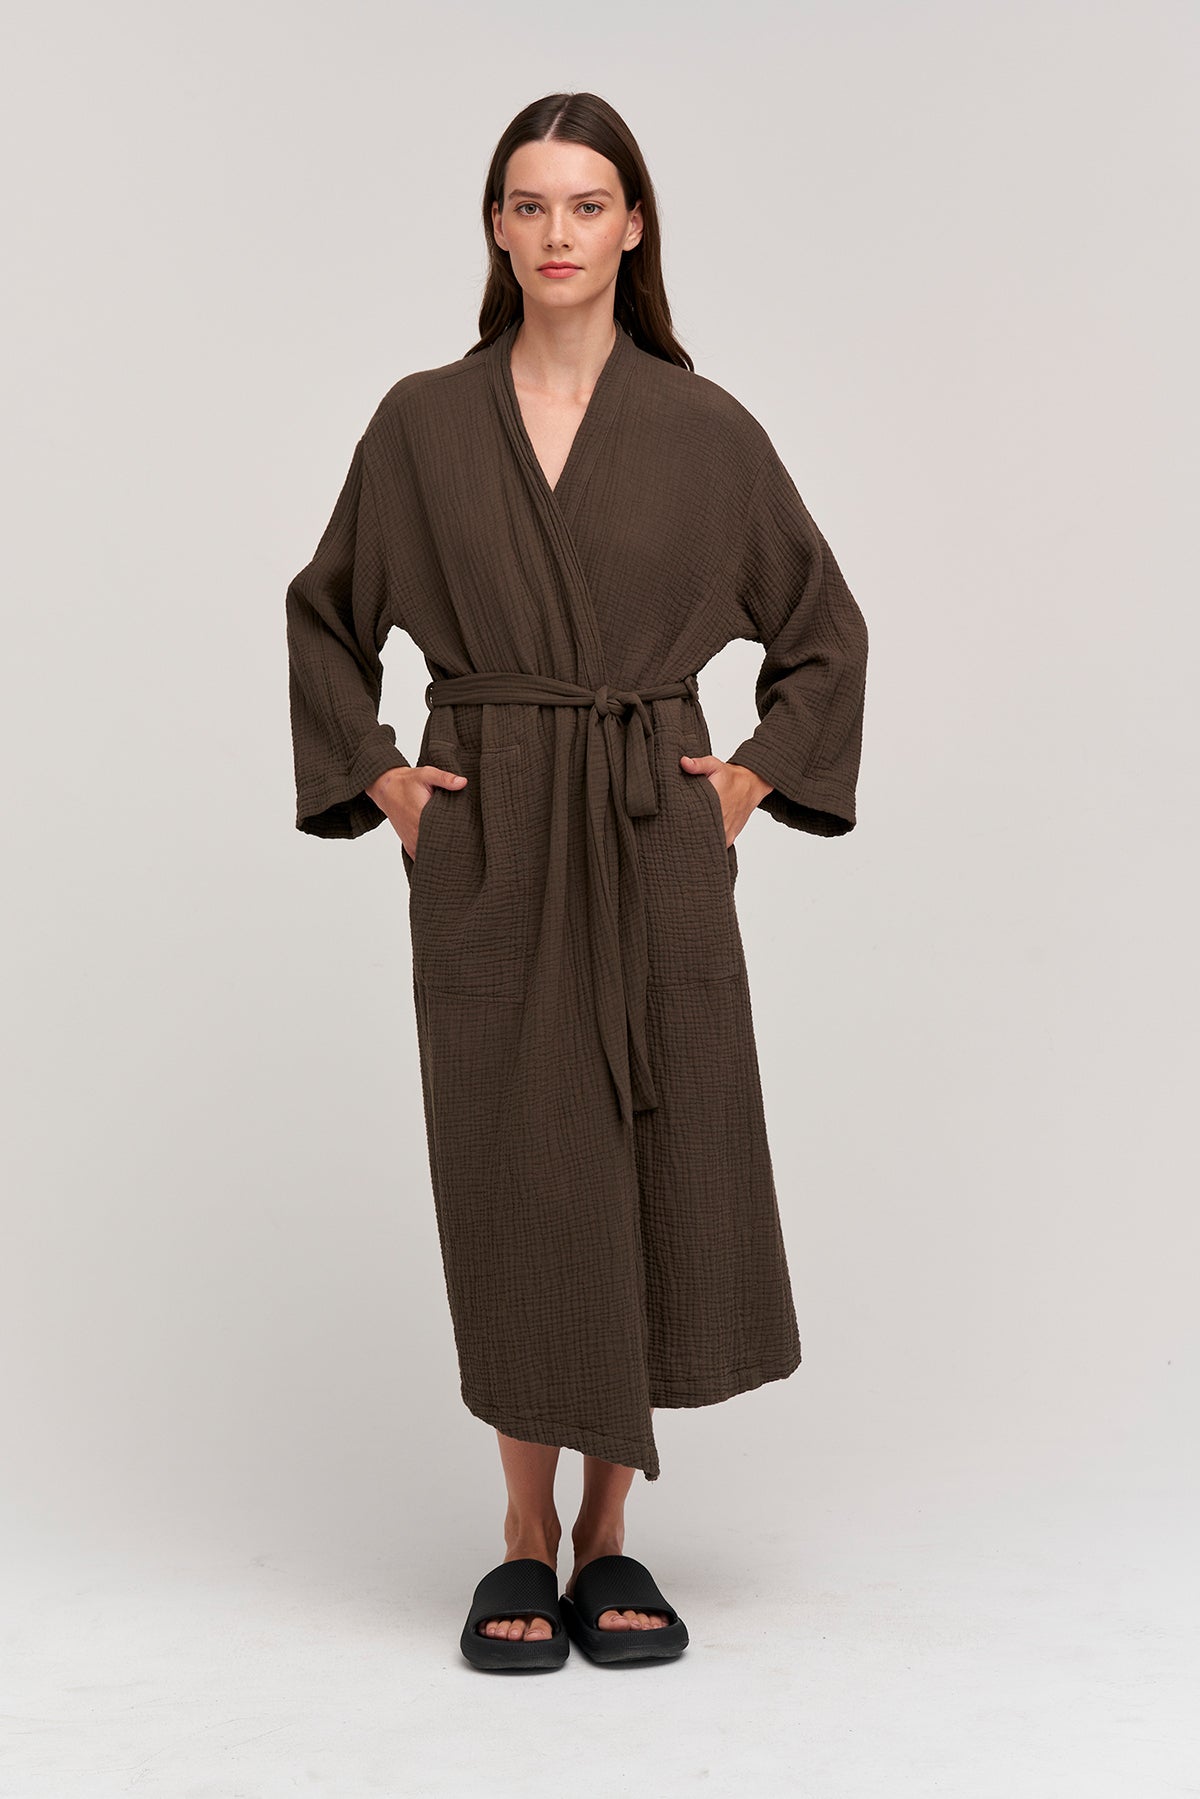   Cotton Robe Army Front 2 